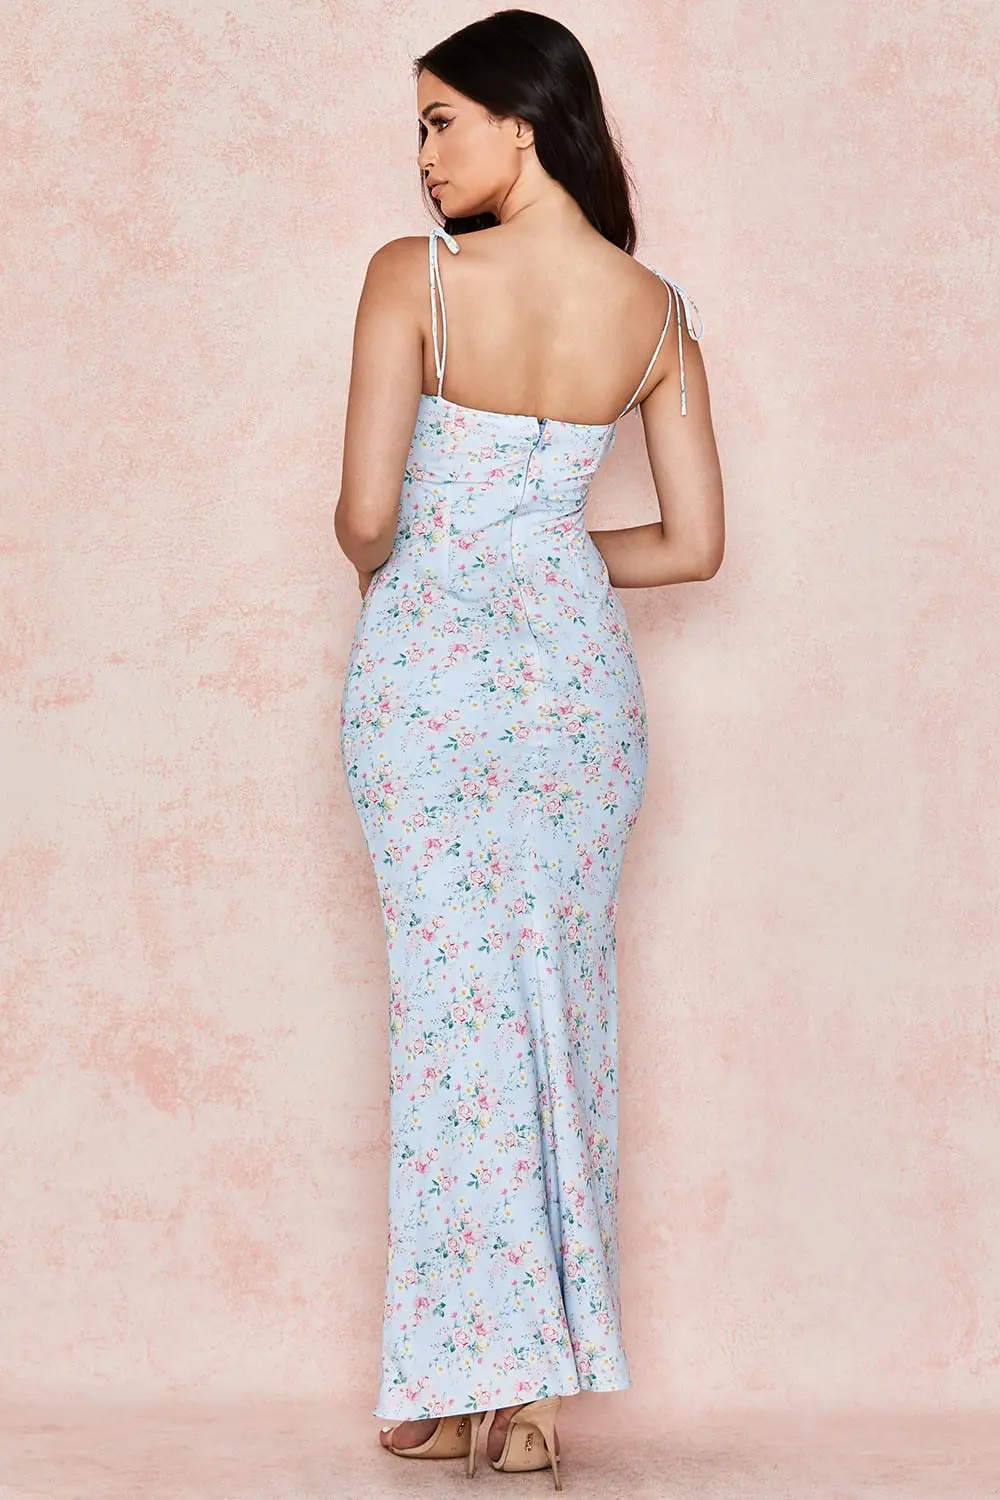 Flowery maxi dress with floral print